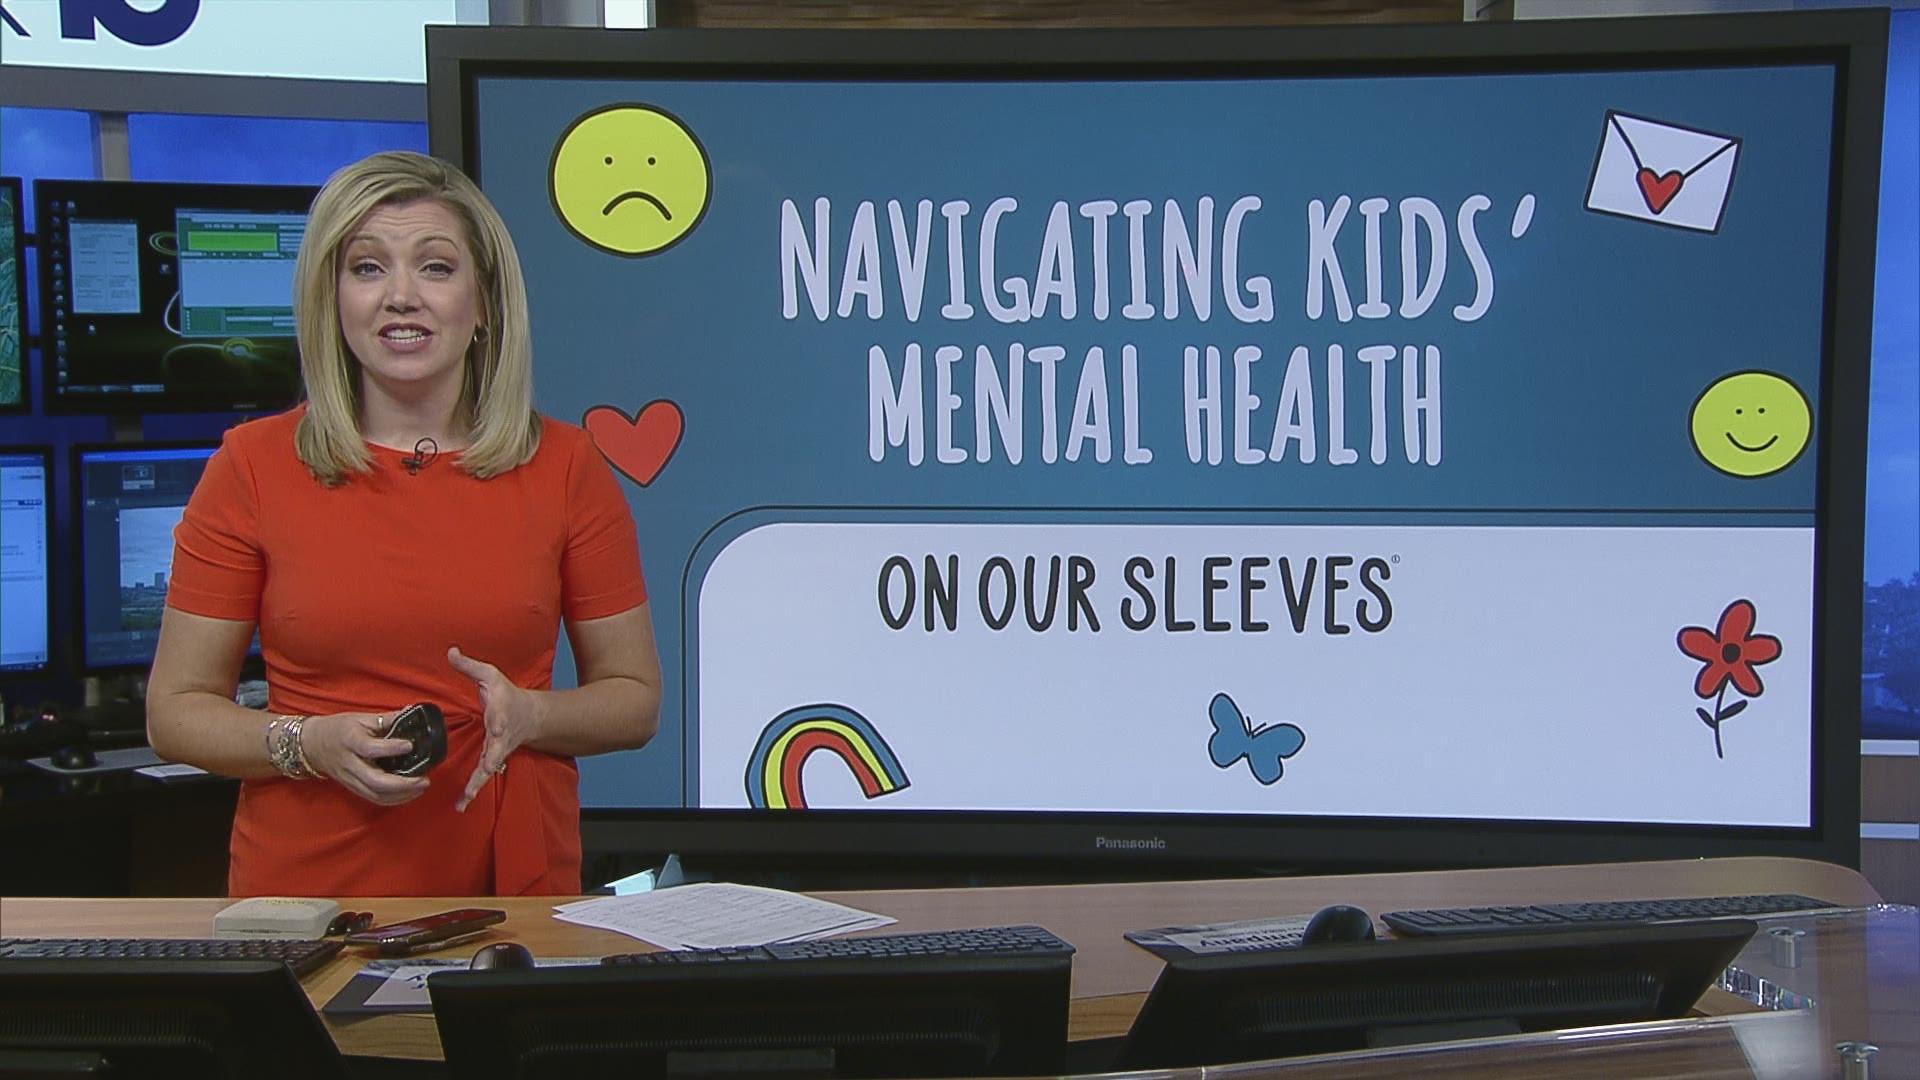 Pediatric psychologist Whitne Raglin Bignall discusses teaching children how to understand emotions in others.